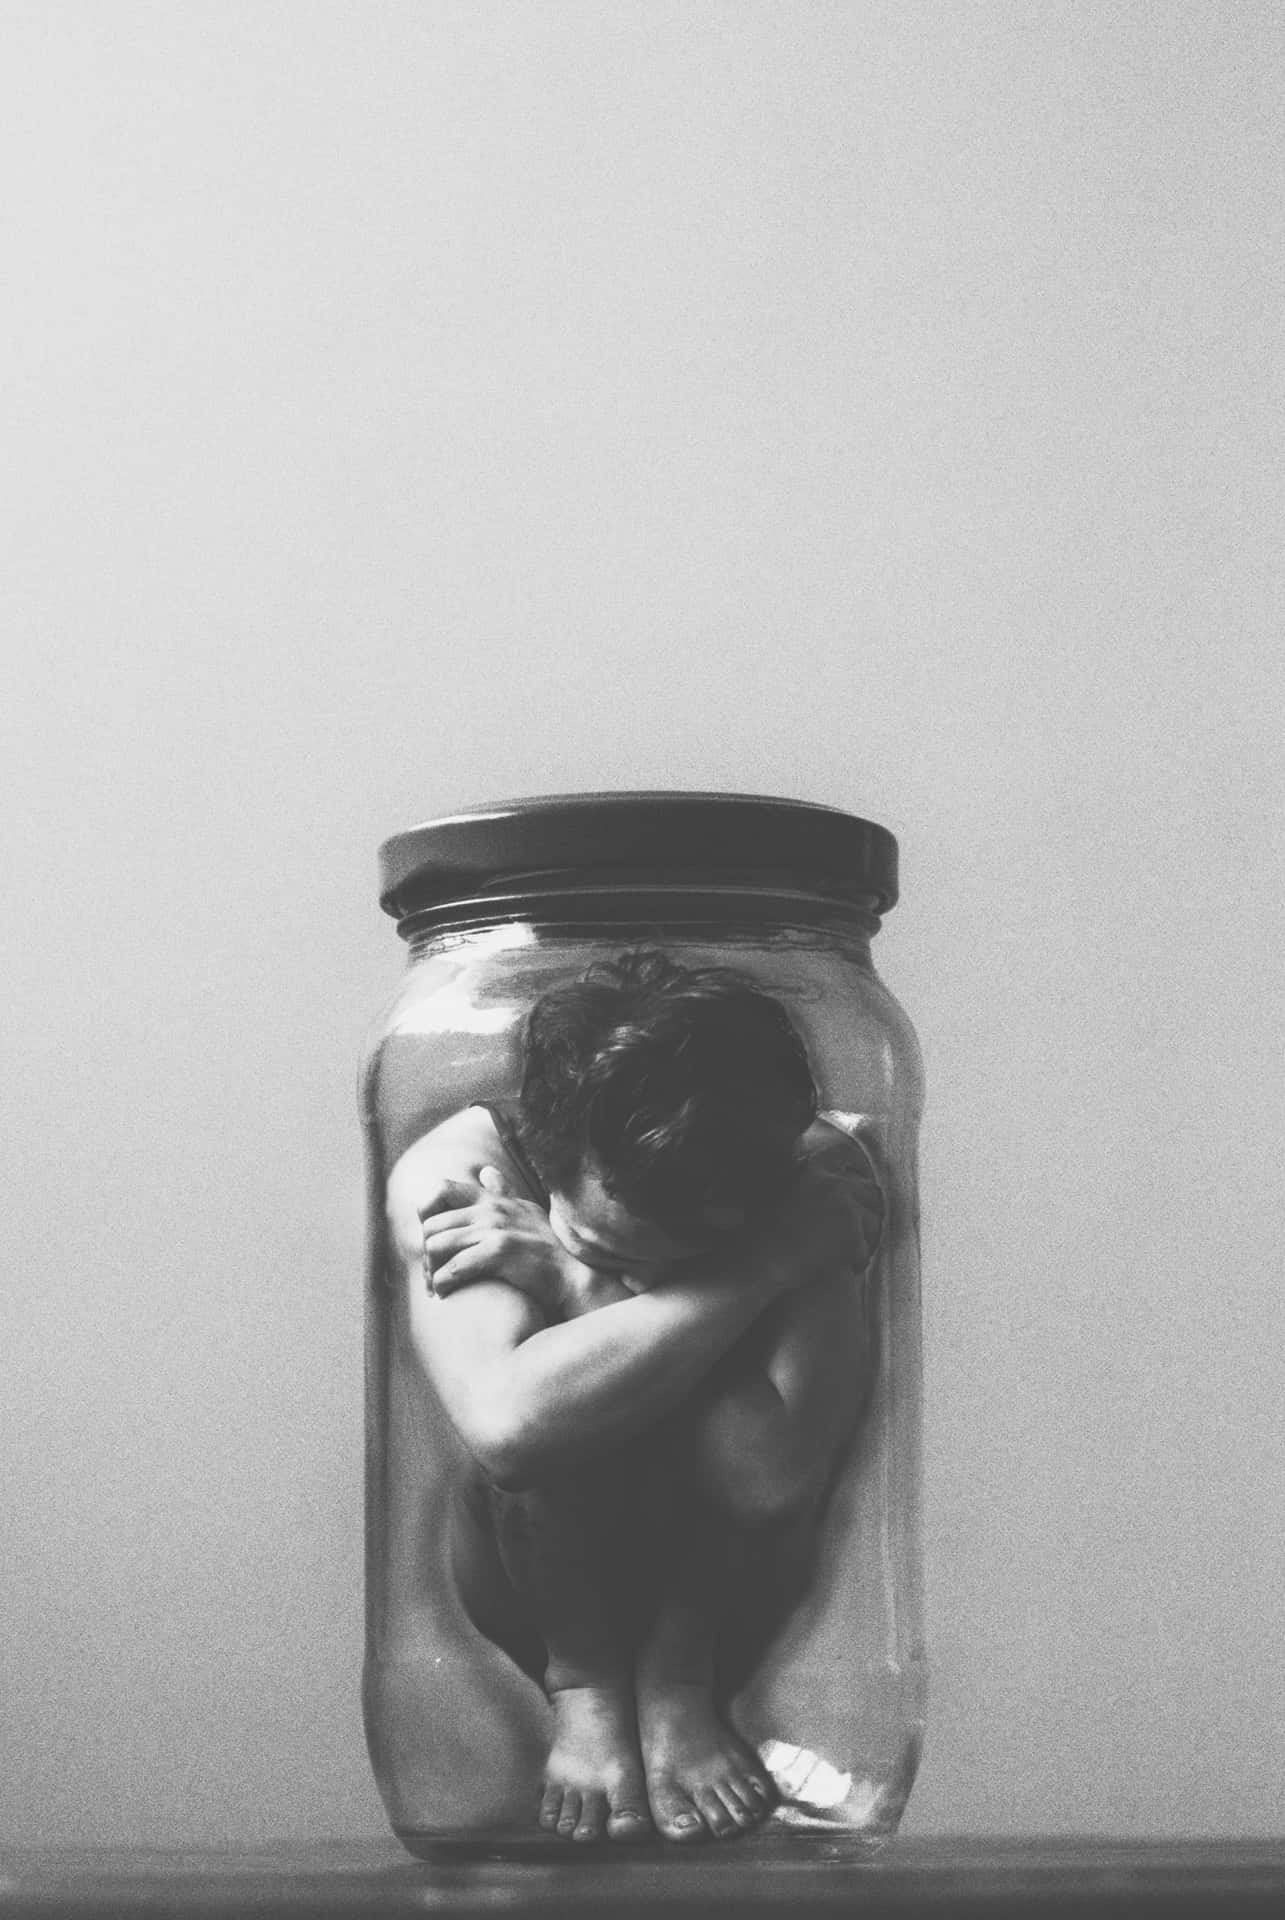 A Person Is Sitting In A Glass Jar